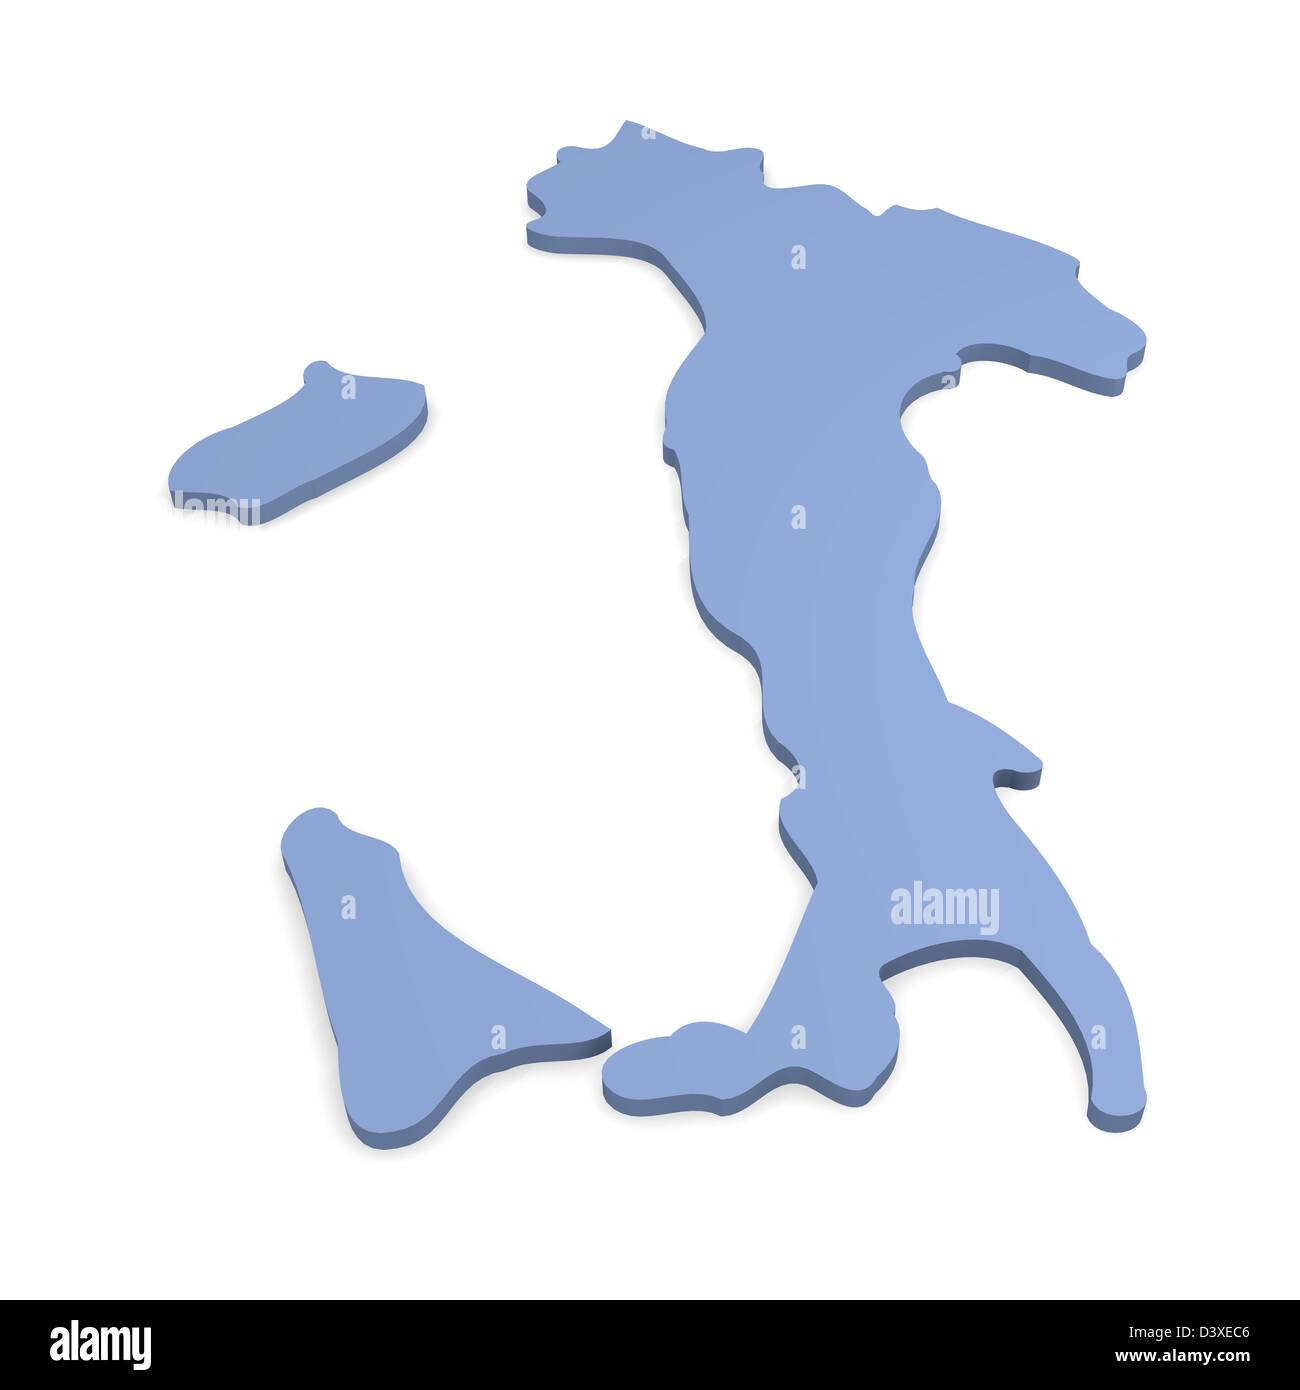 3d map of Italy isolated on a white background Stock Photo